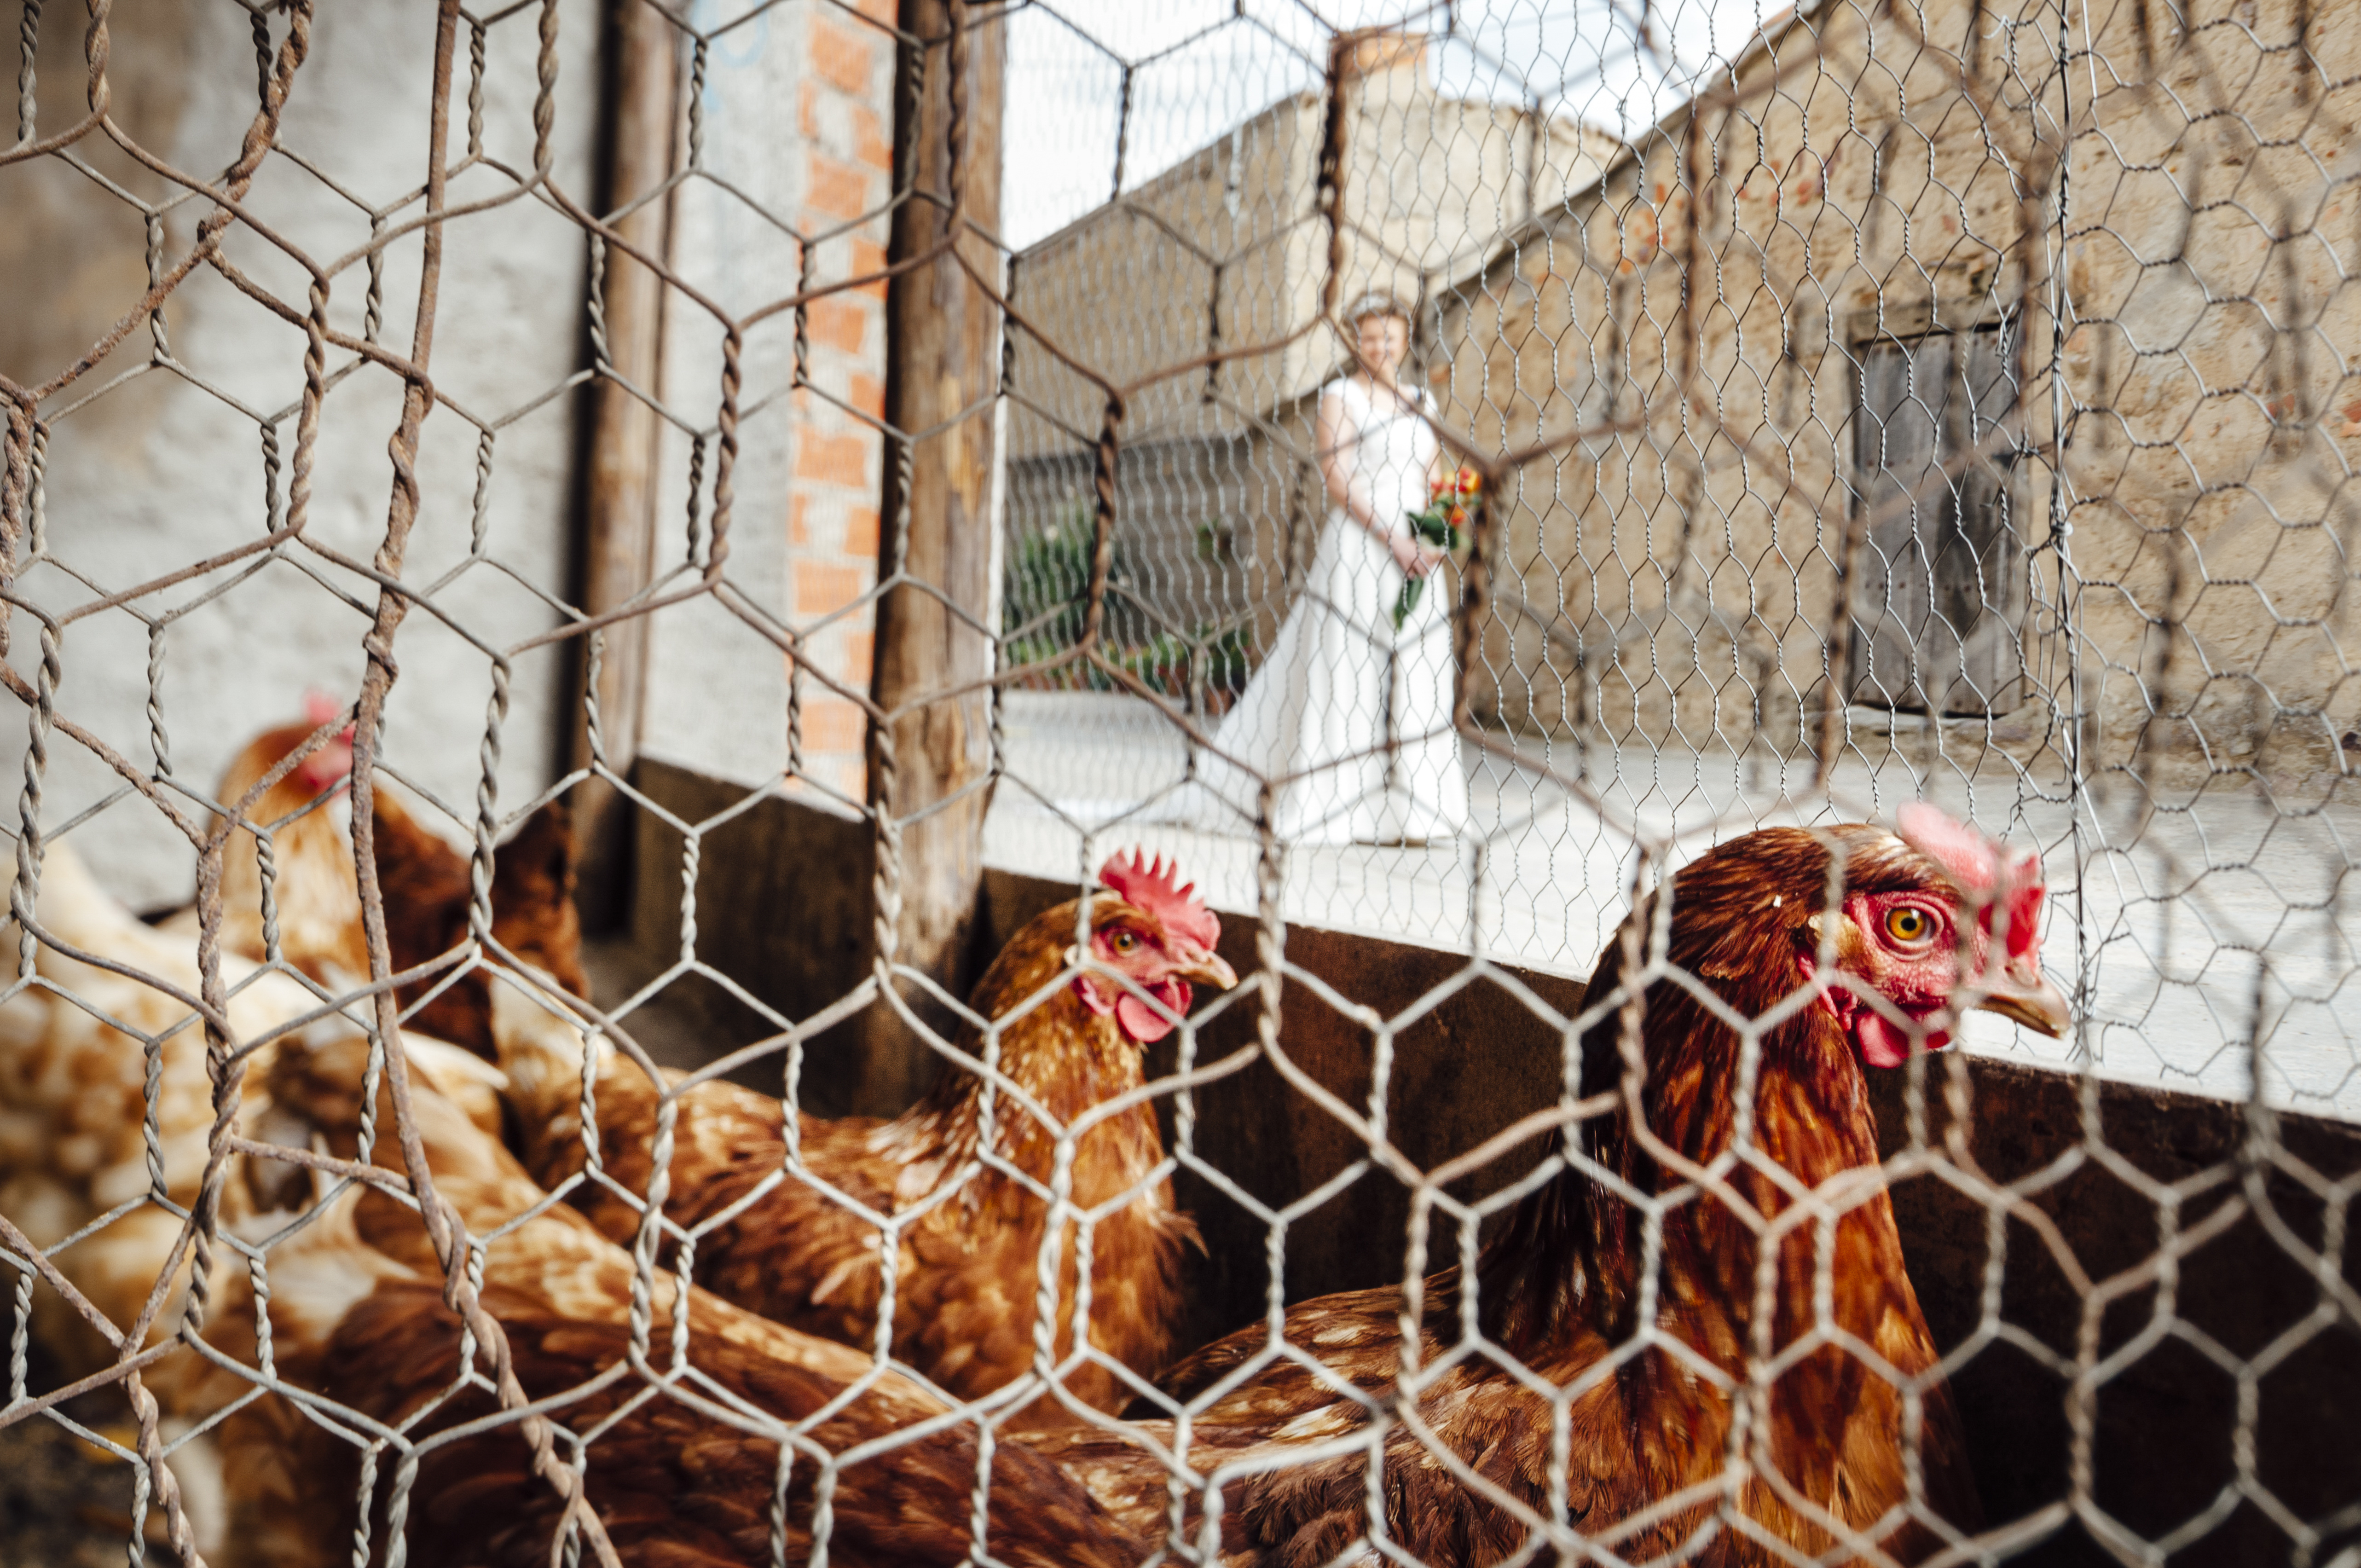 Chickens in a chicken coop with a bride in a background